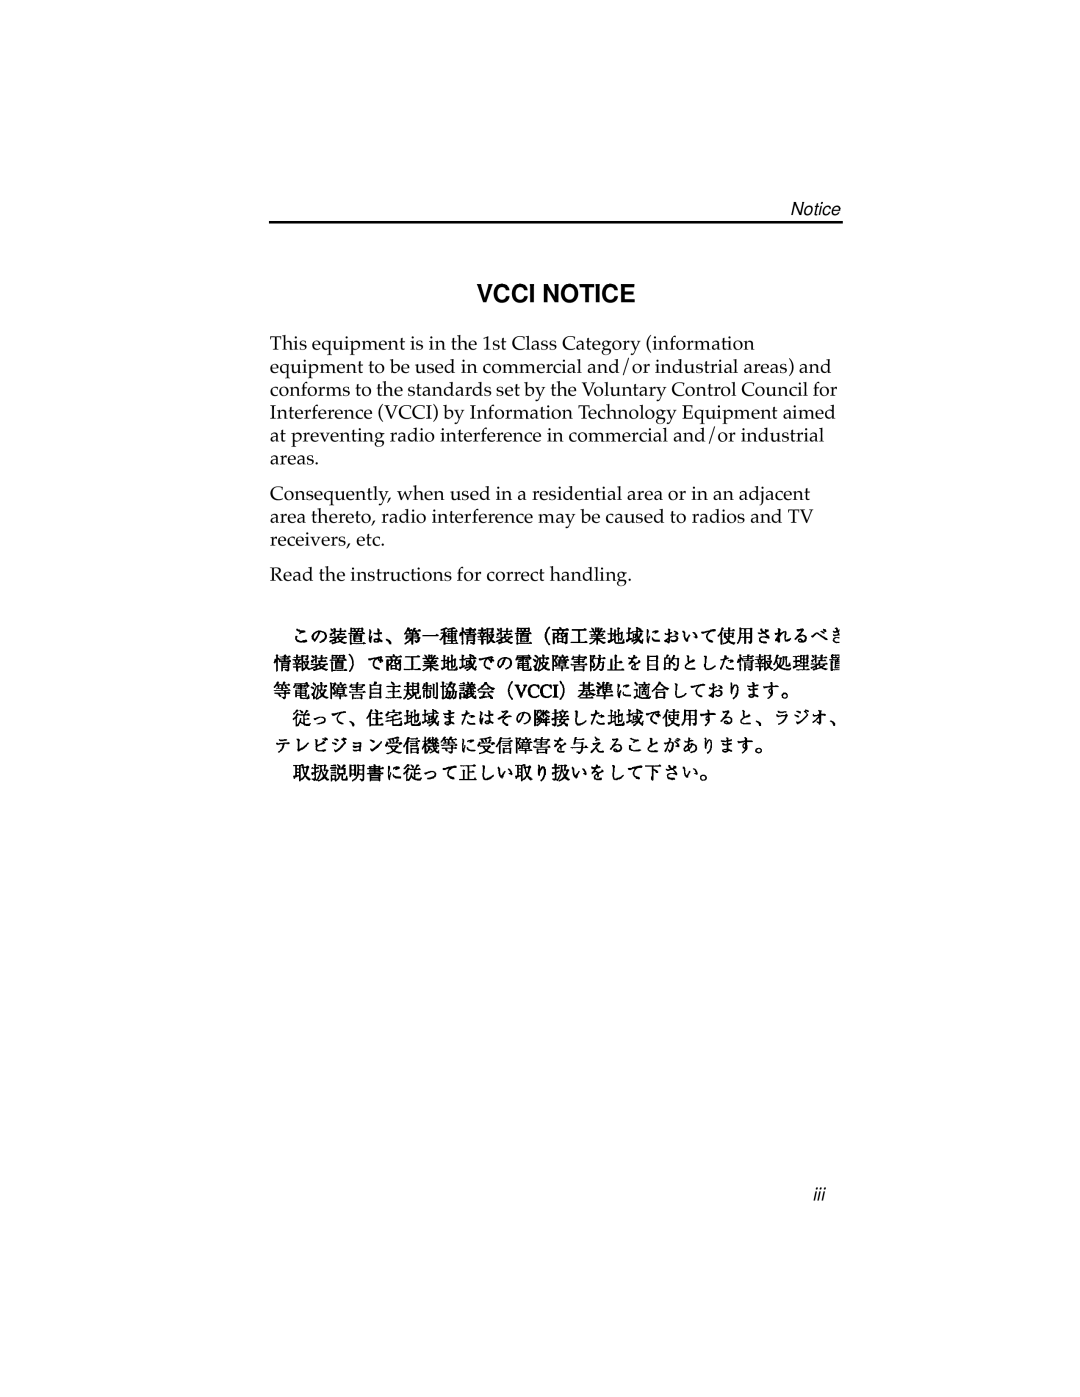 Cabletron Systems 7C04 Workgroup manual Vcci Notice 